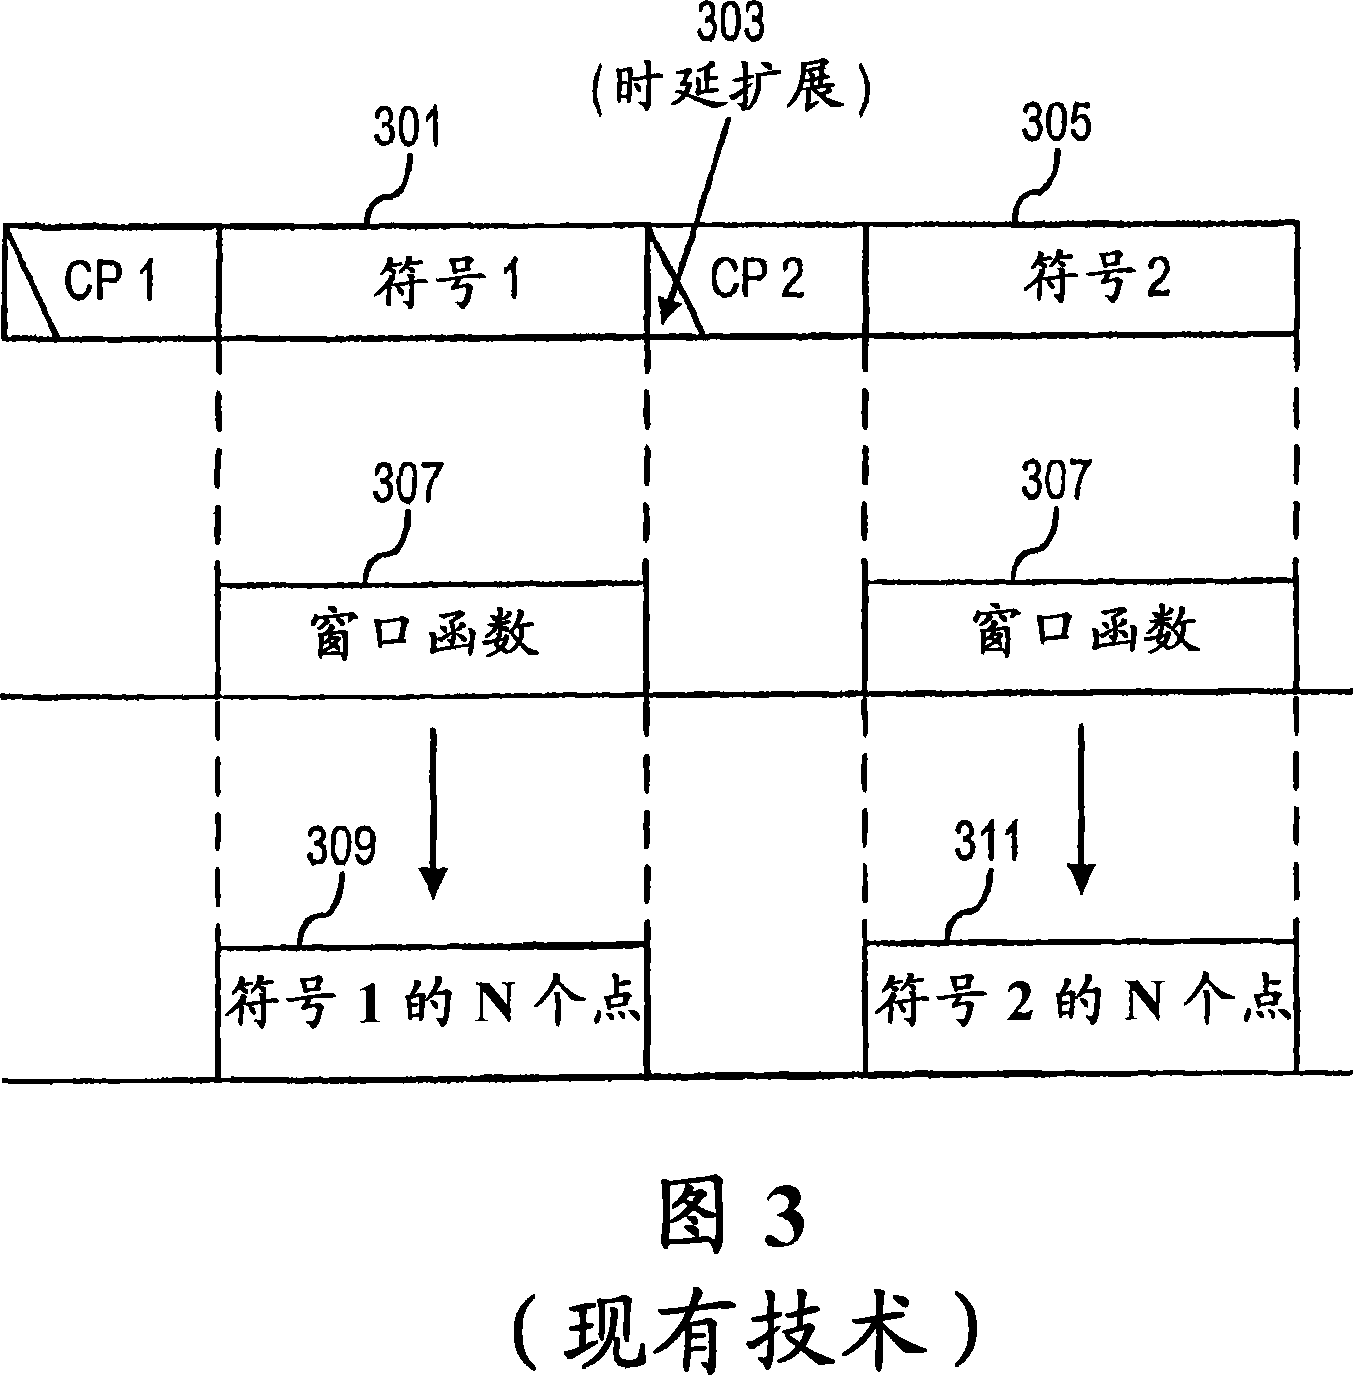 Time domain windowing and inter-carrier interference cancellation